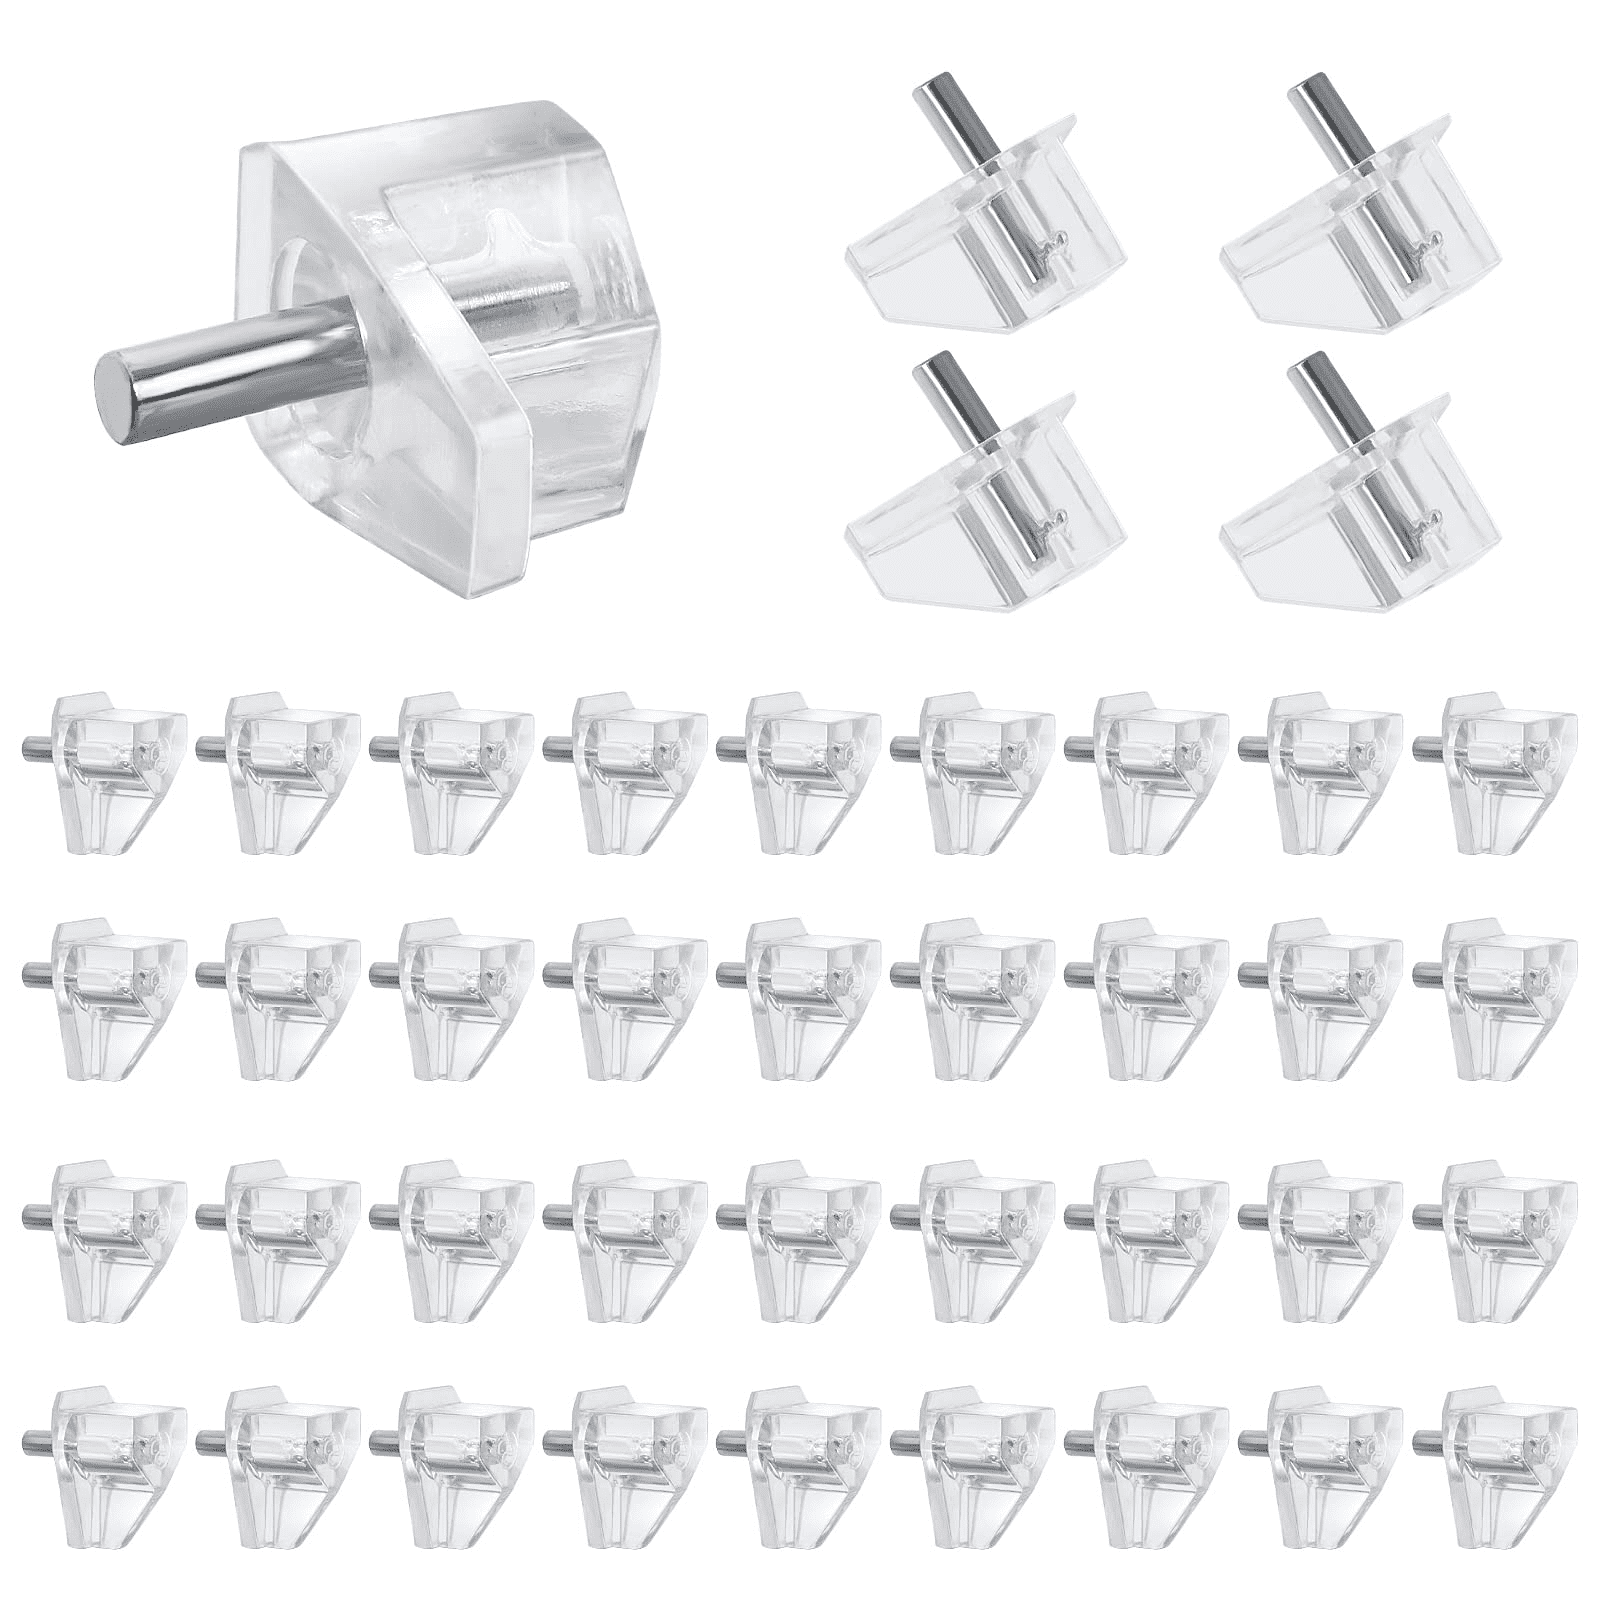 STUDS CLEAR WITH METAL PIN KITCHEN CABINET SHELF 5mm 100 x SHELF SUPPORTS PEGS 